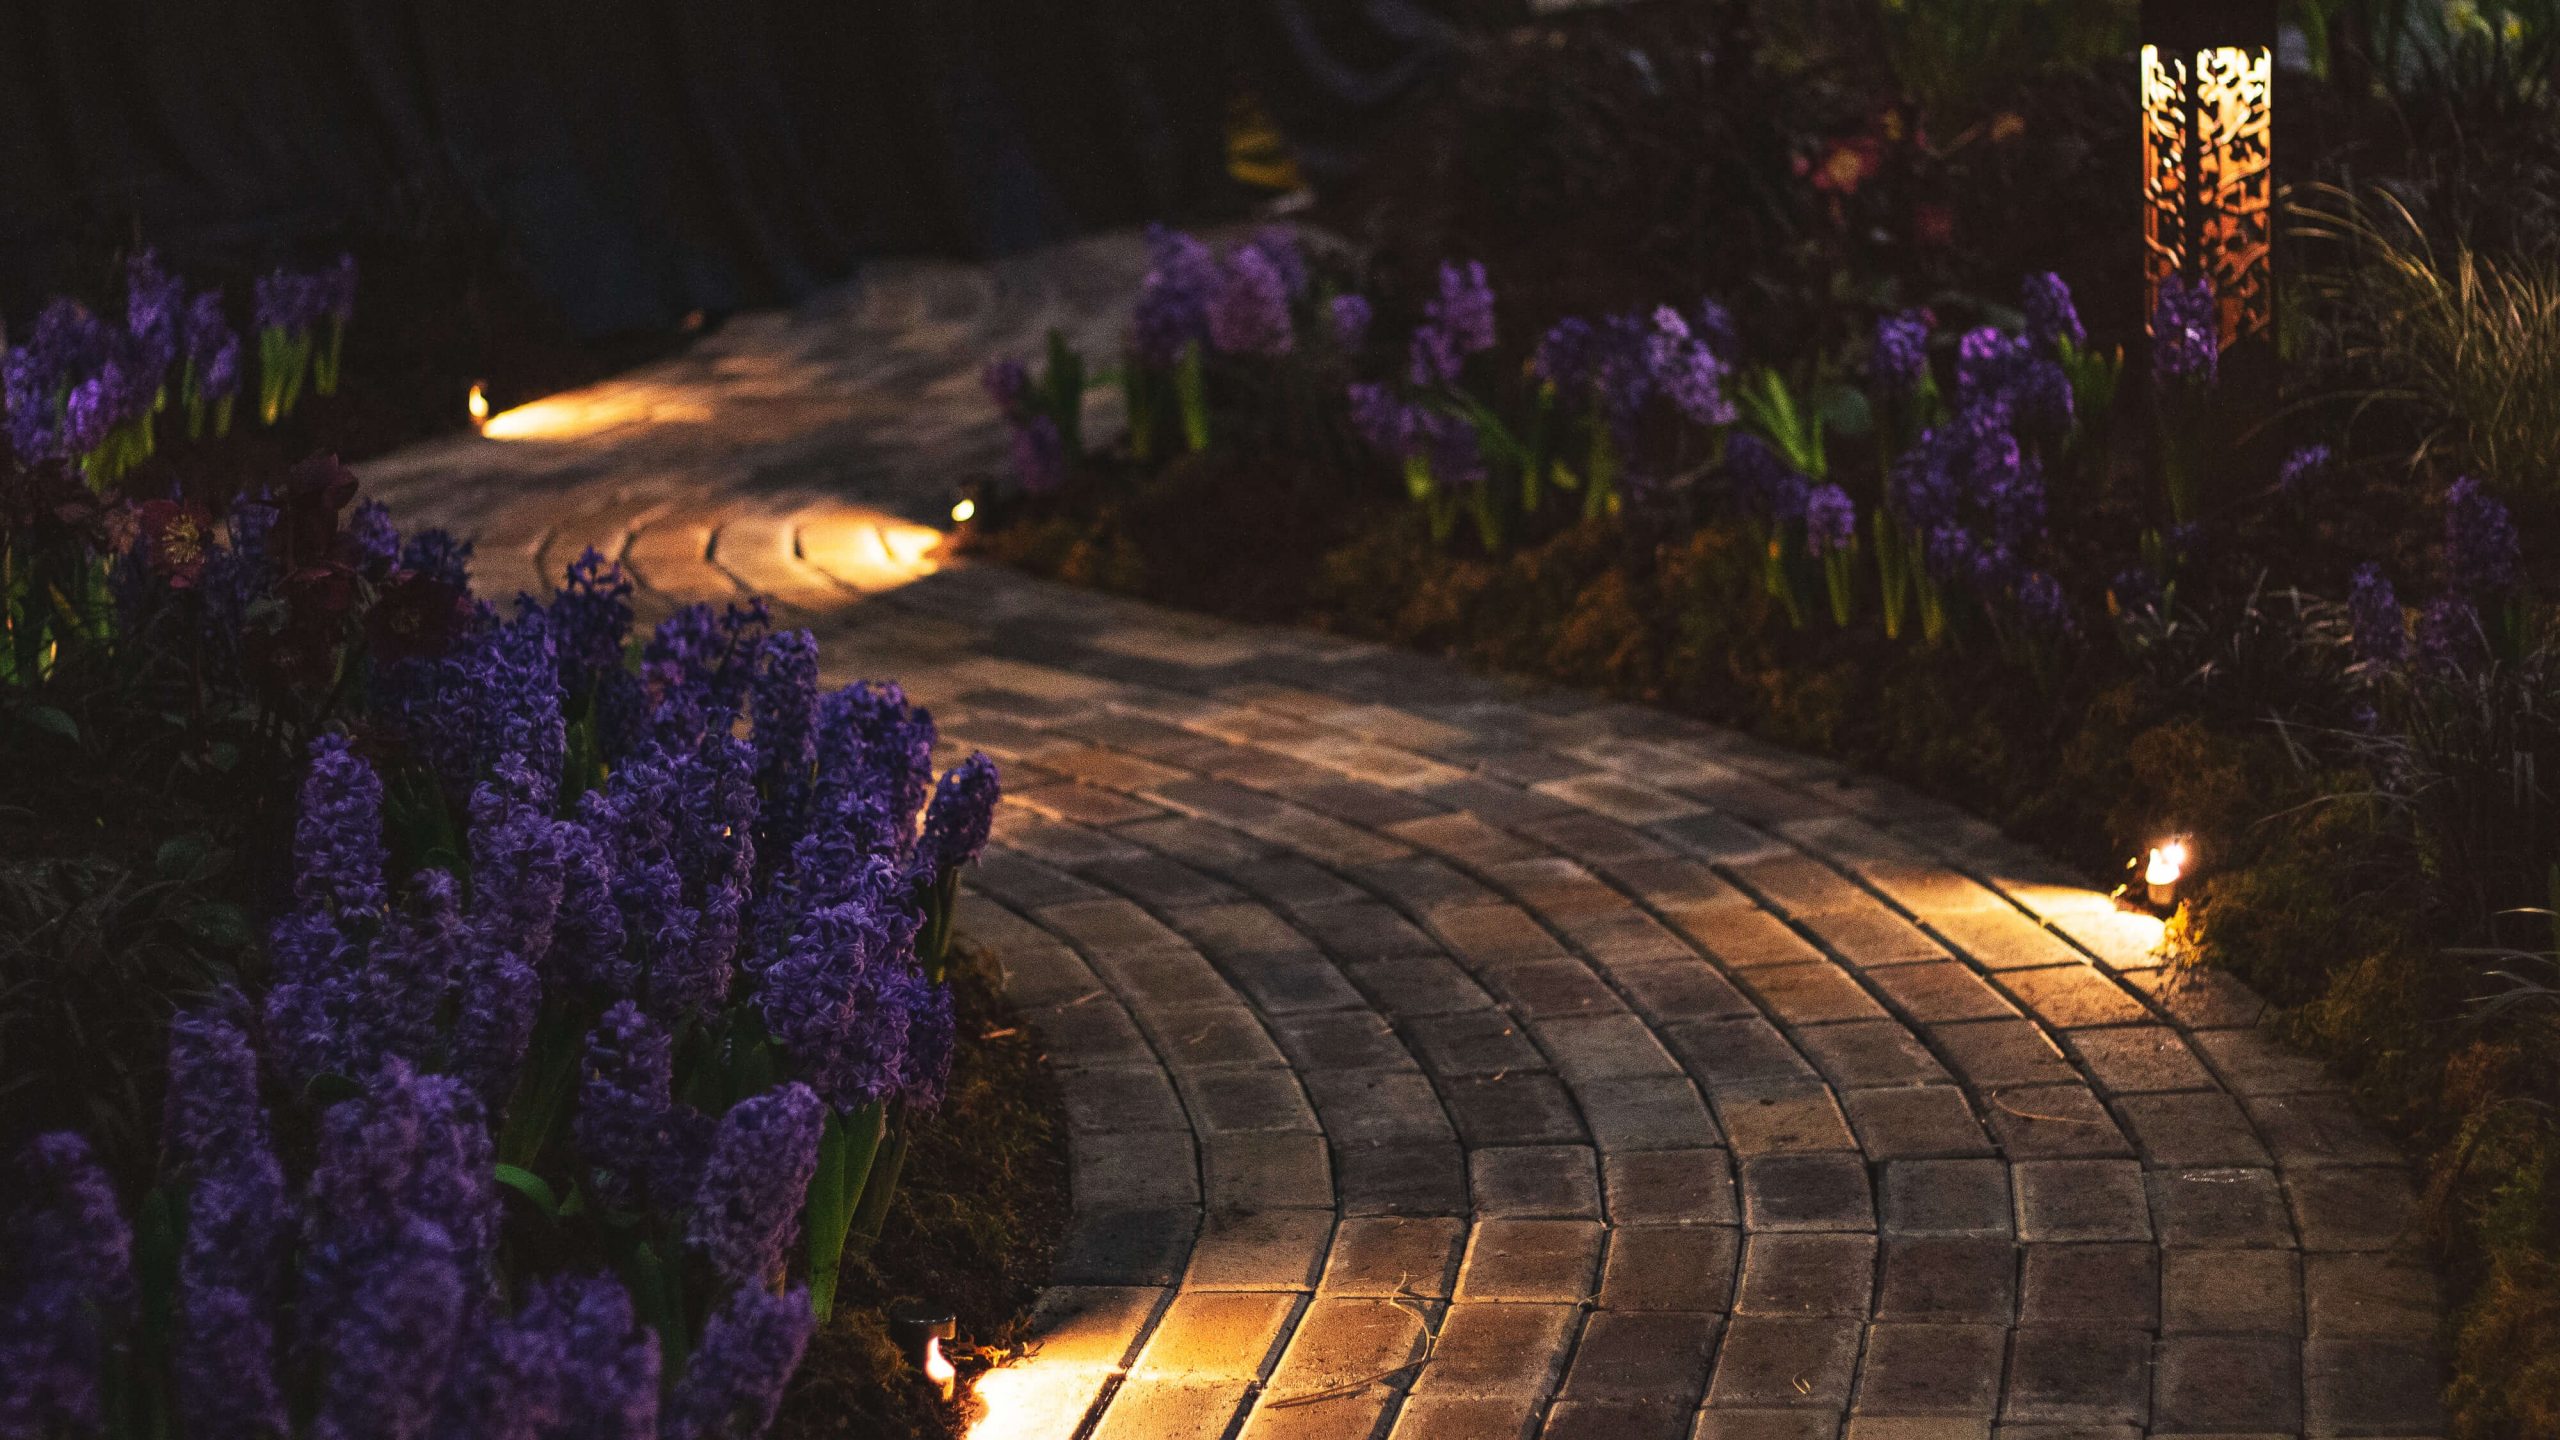 Lit up walkways - Installing outdoor lighting in the winter - Allyn White Electrical